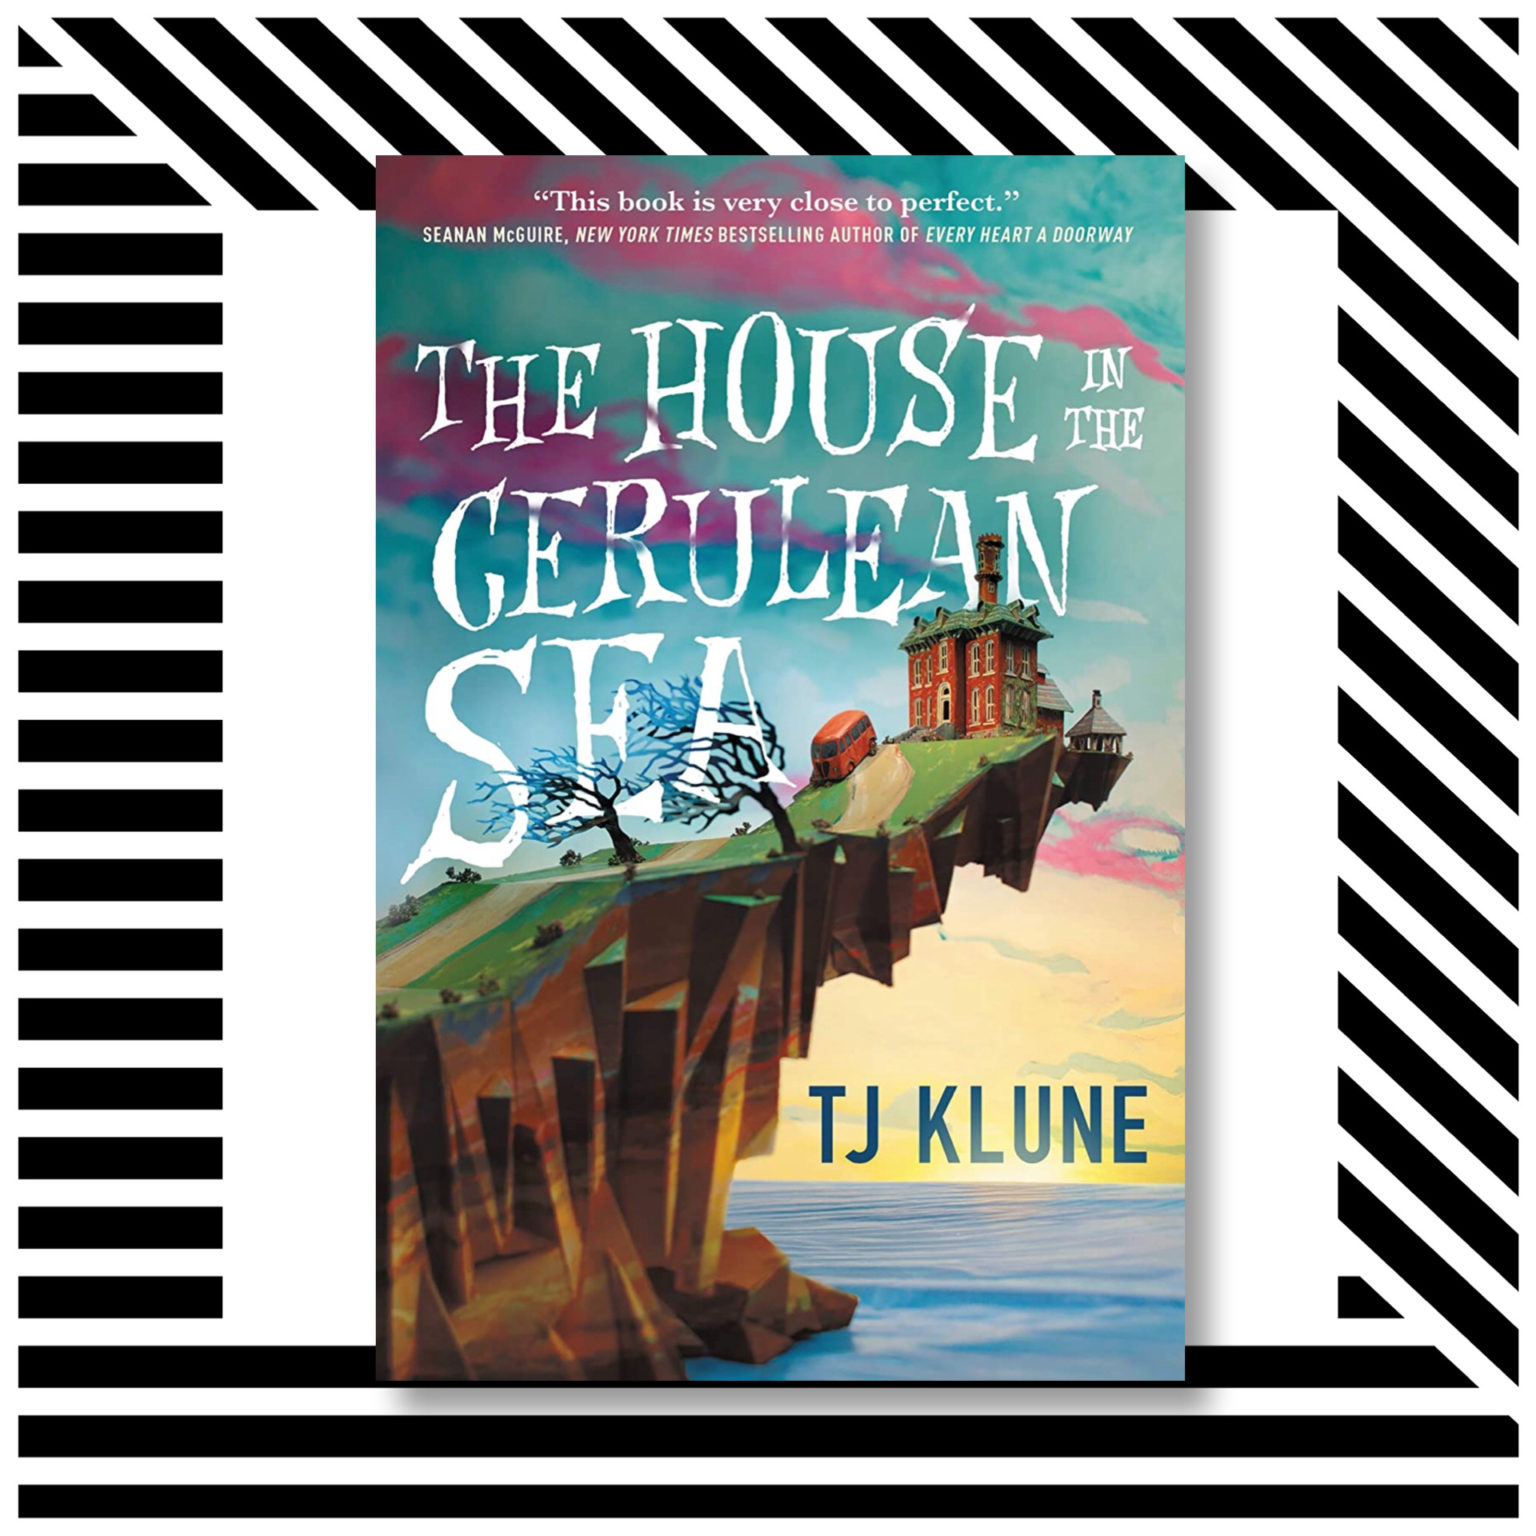 Book Review The House In The Cerulean Sea By Tj Klune